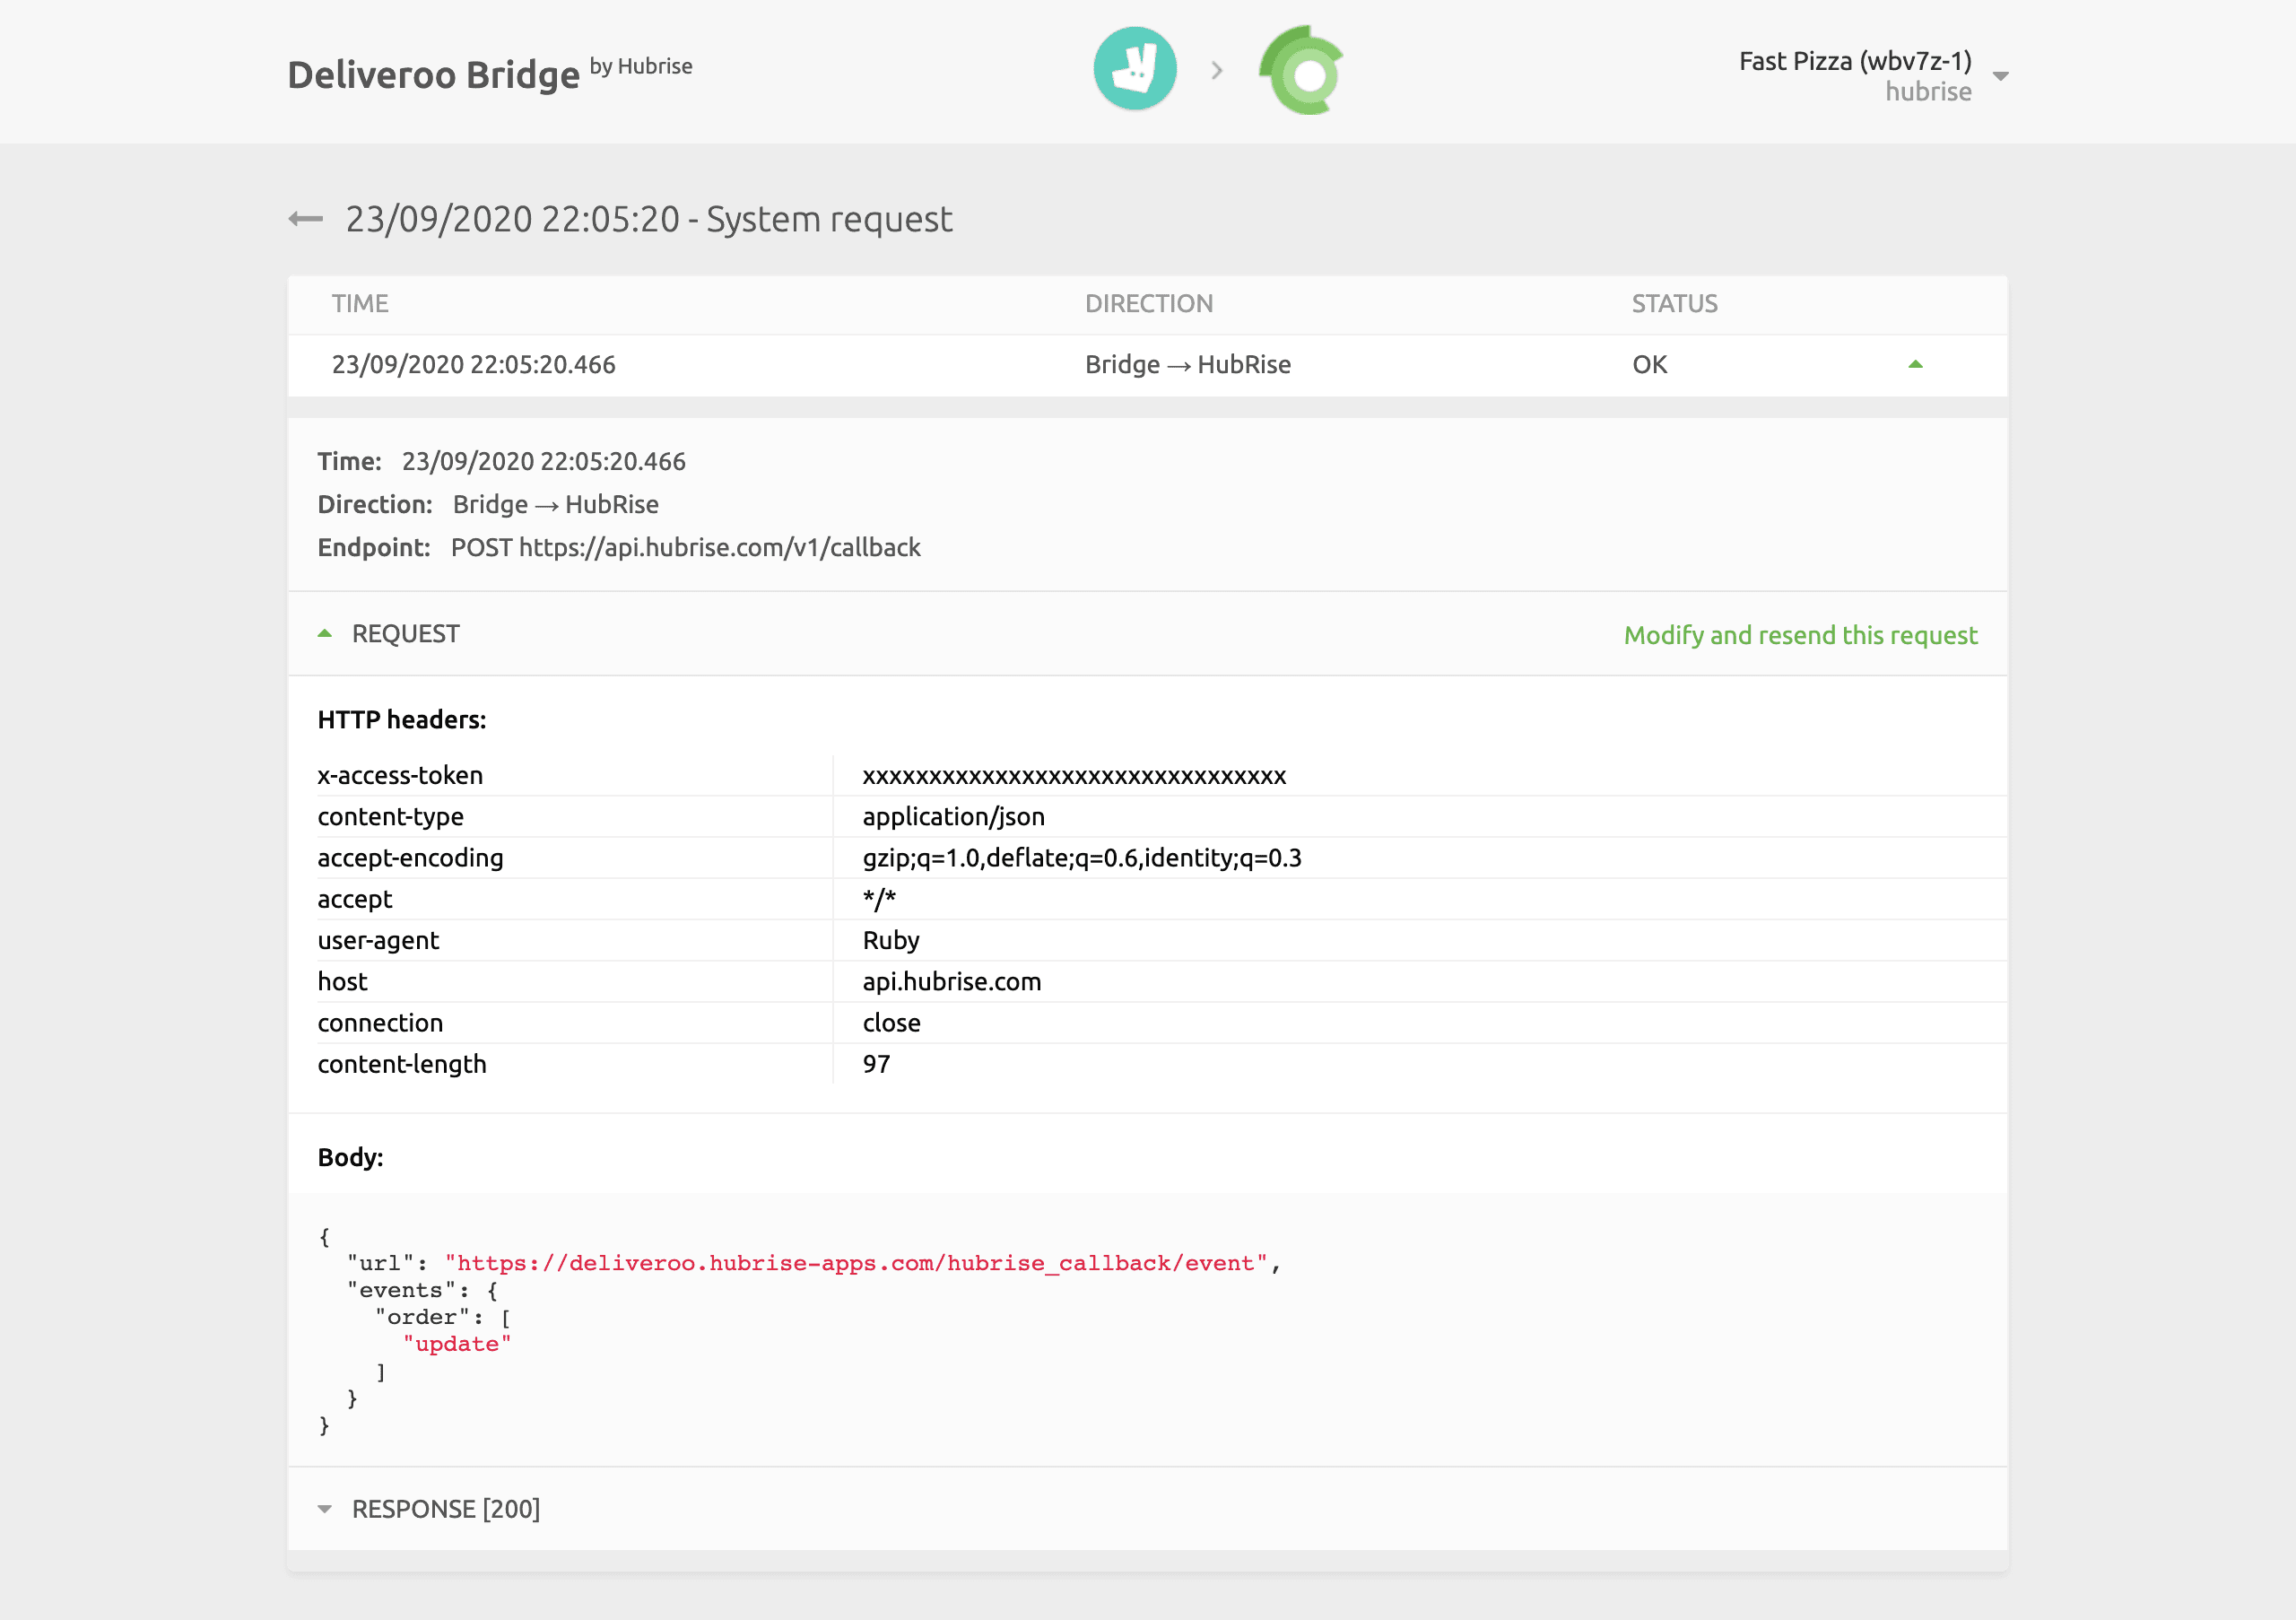 System request page on Deliveroo Bridge